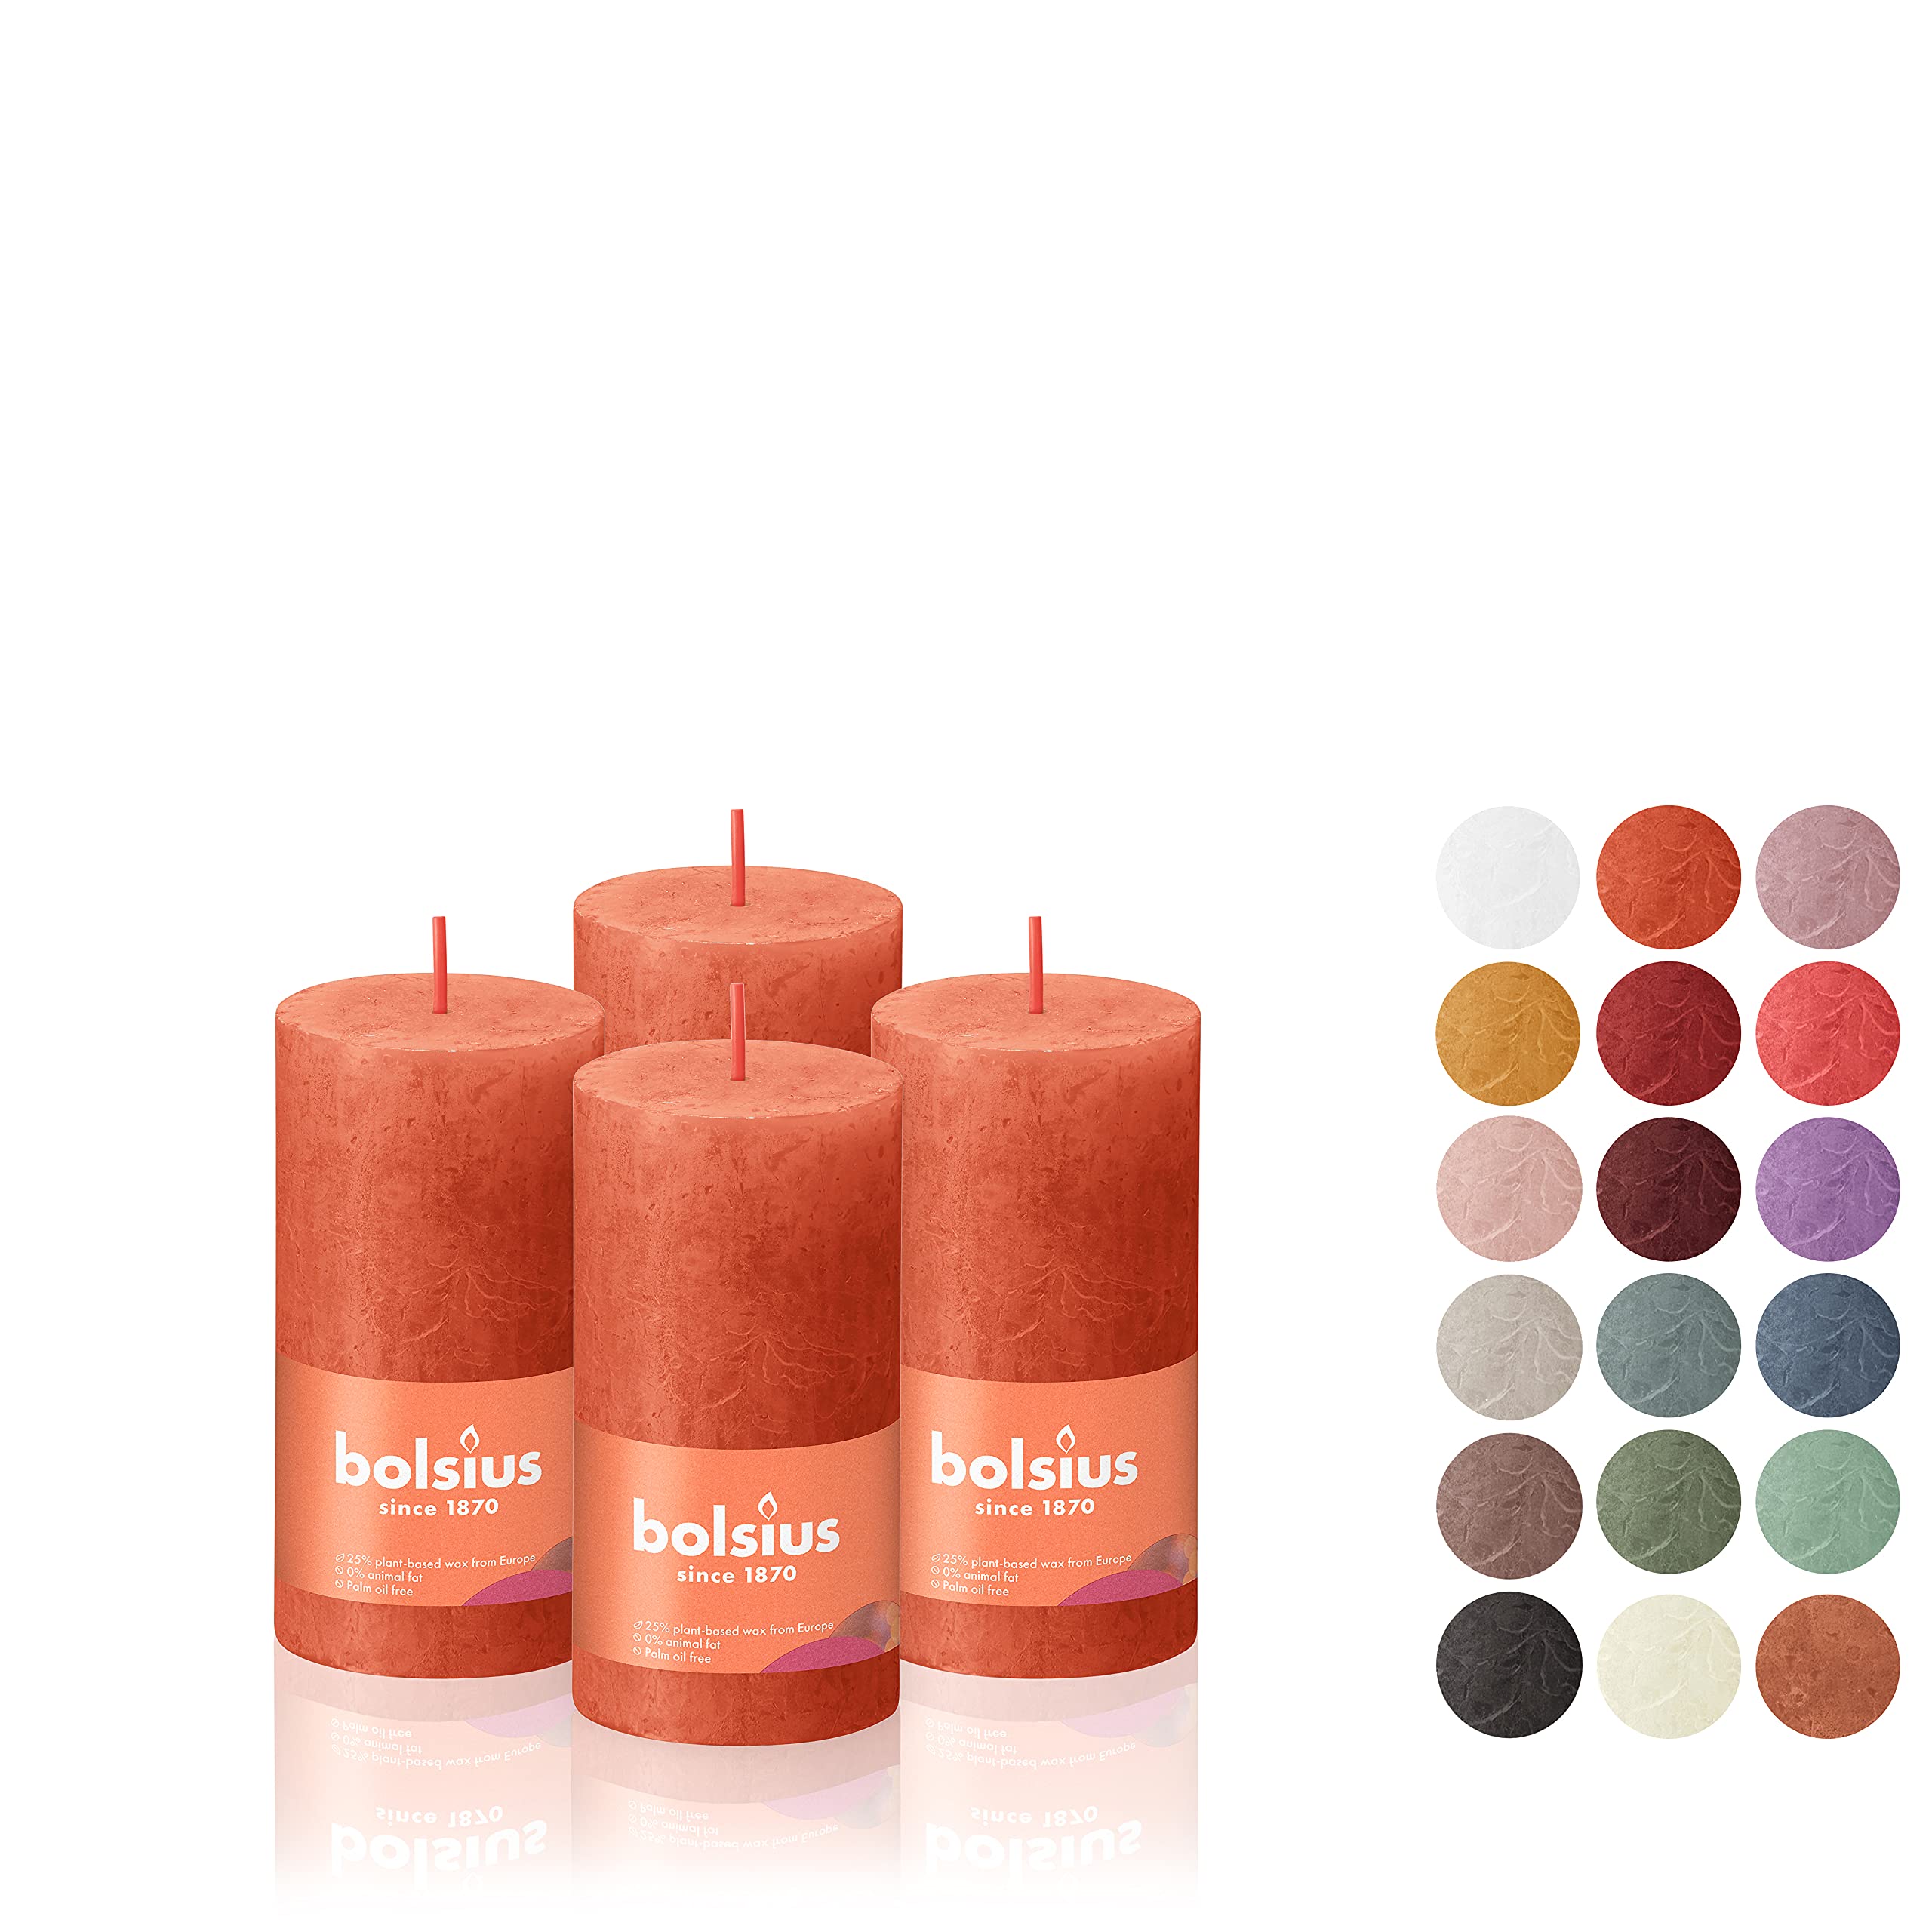 BOLSIUS 4 Pack Orange Rustic Pillar Candles - 2 X 4 Inches - Premium European Quality - Includes Natural Plant-Based Wax - Unscented Dripless Smokeless 30 Hour Party D�cor and Wedding Candles  - Like New